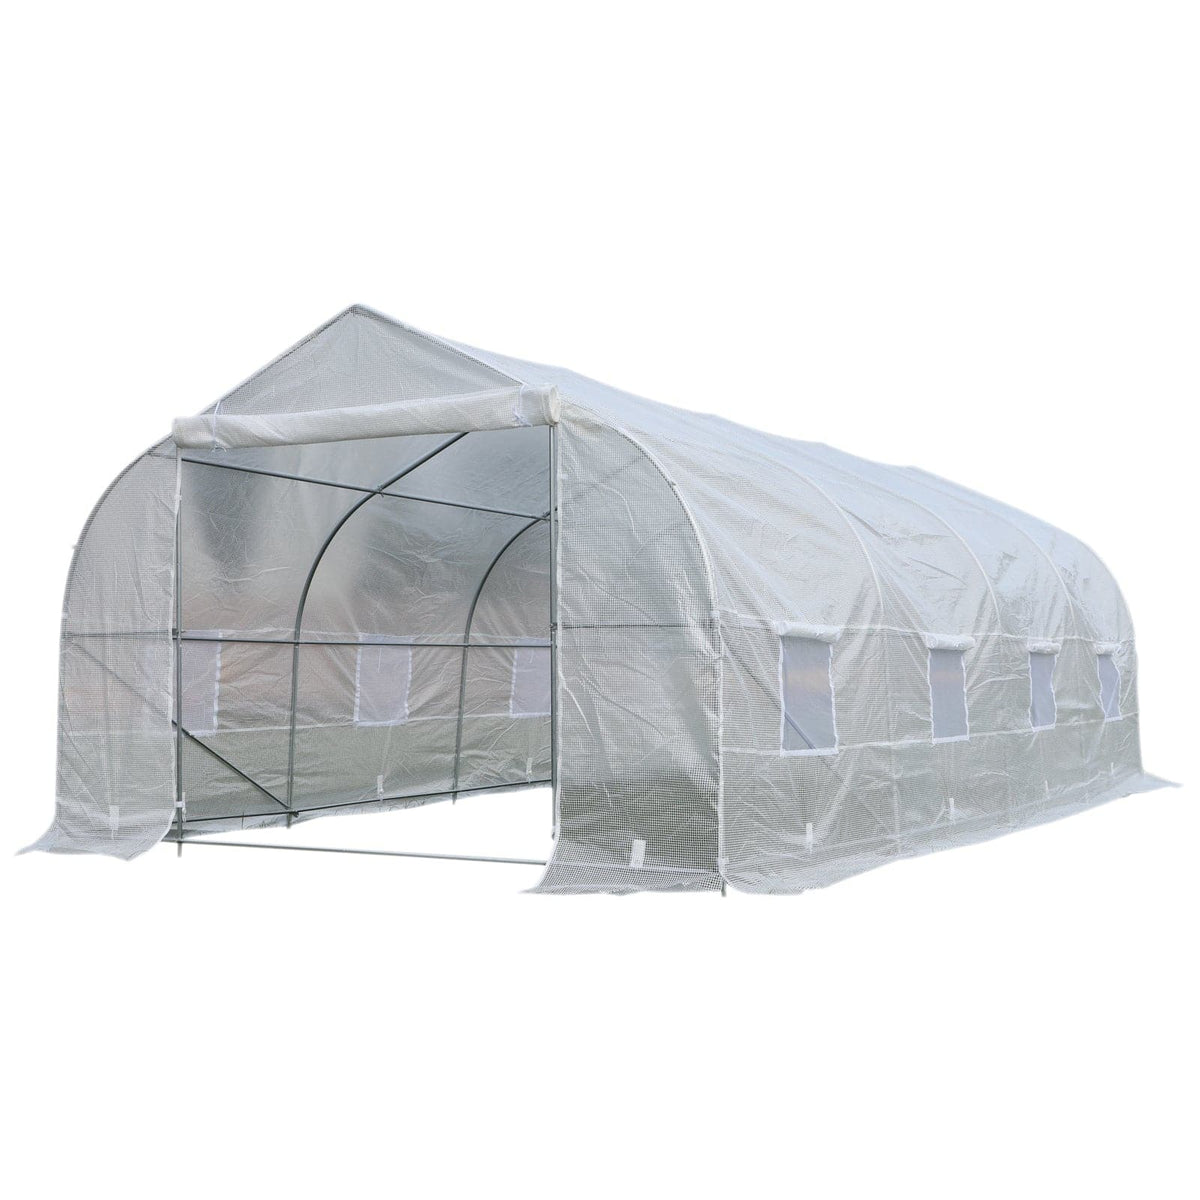 An Aosom Outsunny 20&#39; x 10&#39; x 7&#39; Deluxe High Tunnel Walk-in Garden Greenhouse Kit - White on a white background.